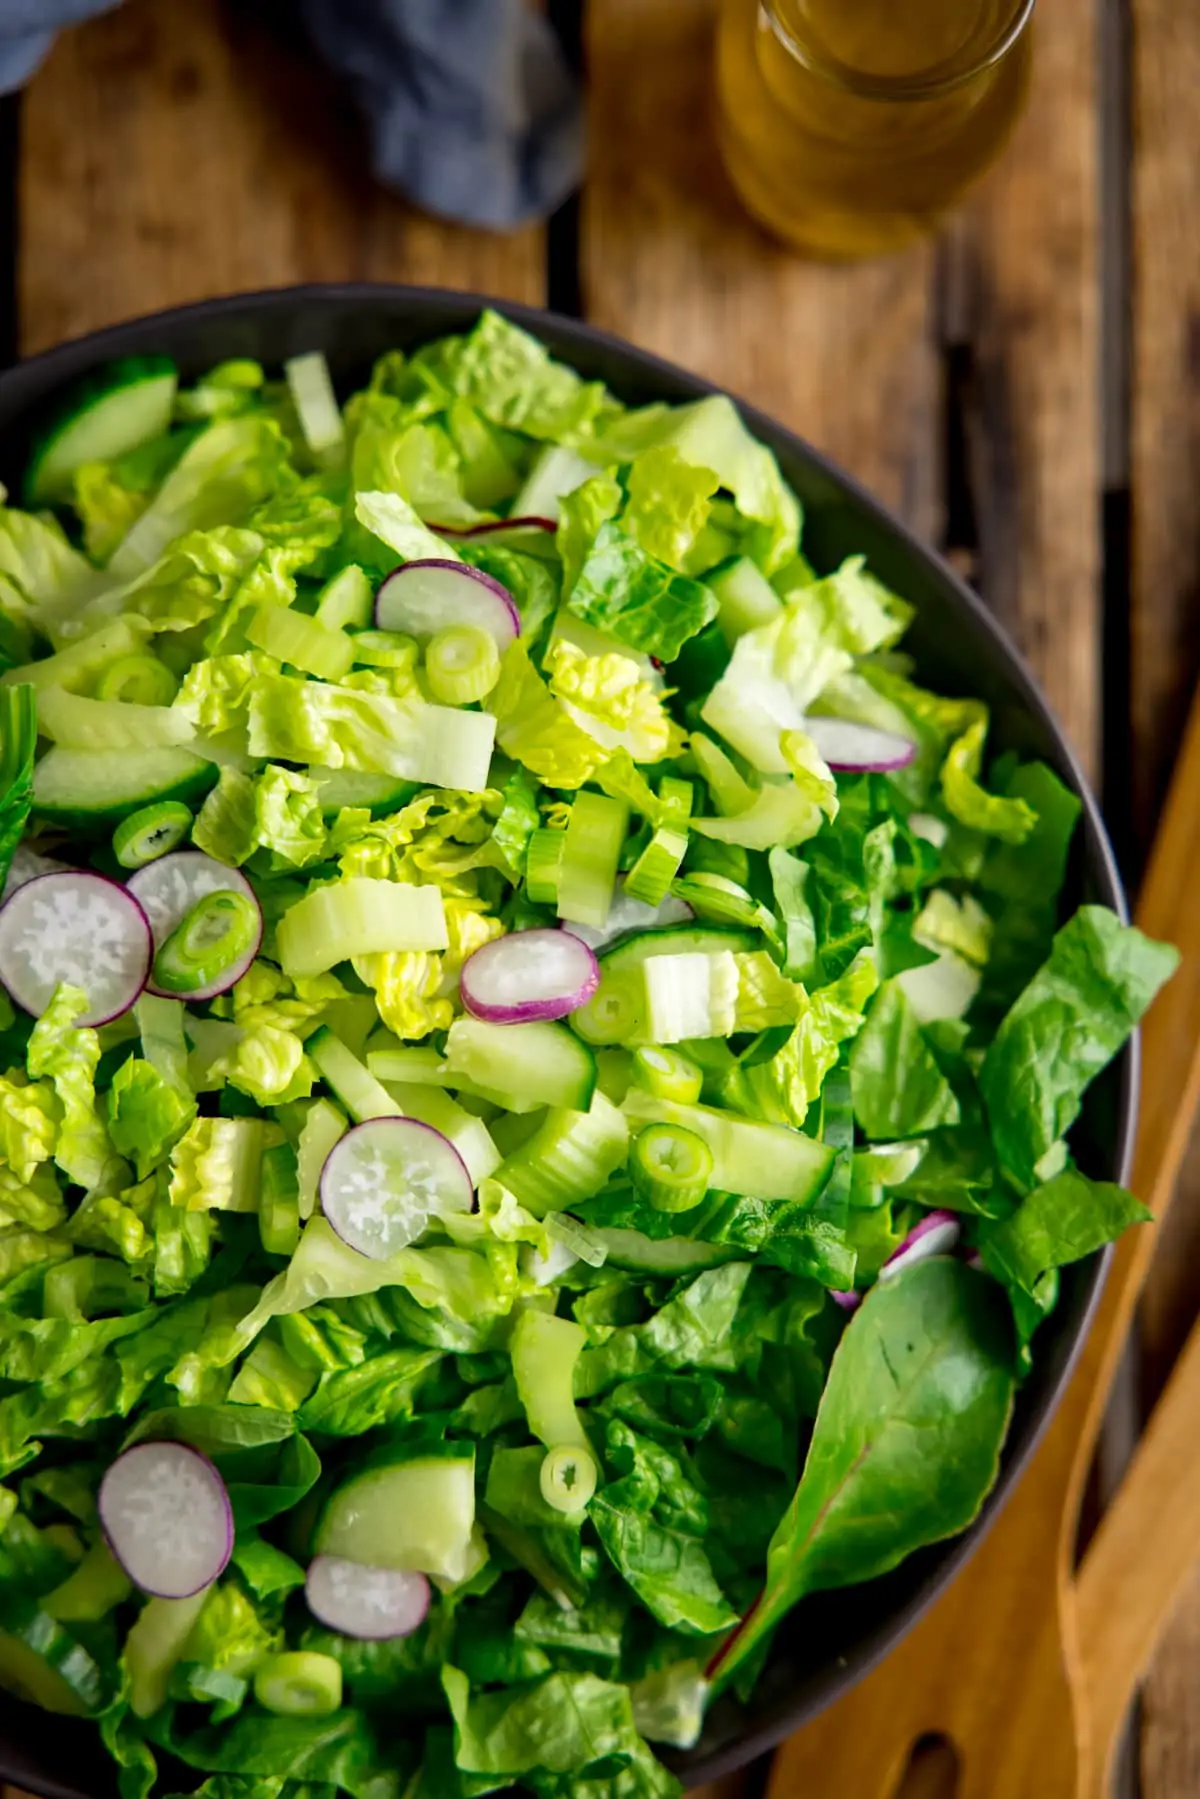 Overhead image of a bowl of simple green salad on a wooden table. Salad servers, salad dressing and a napkin are also in shot.